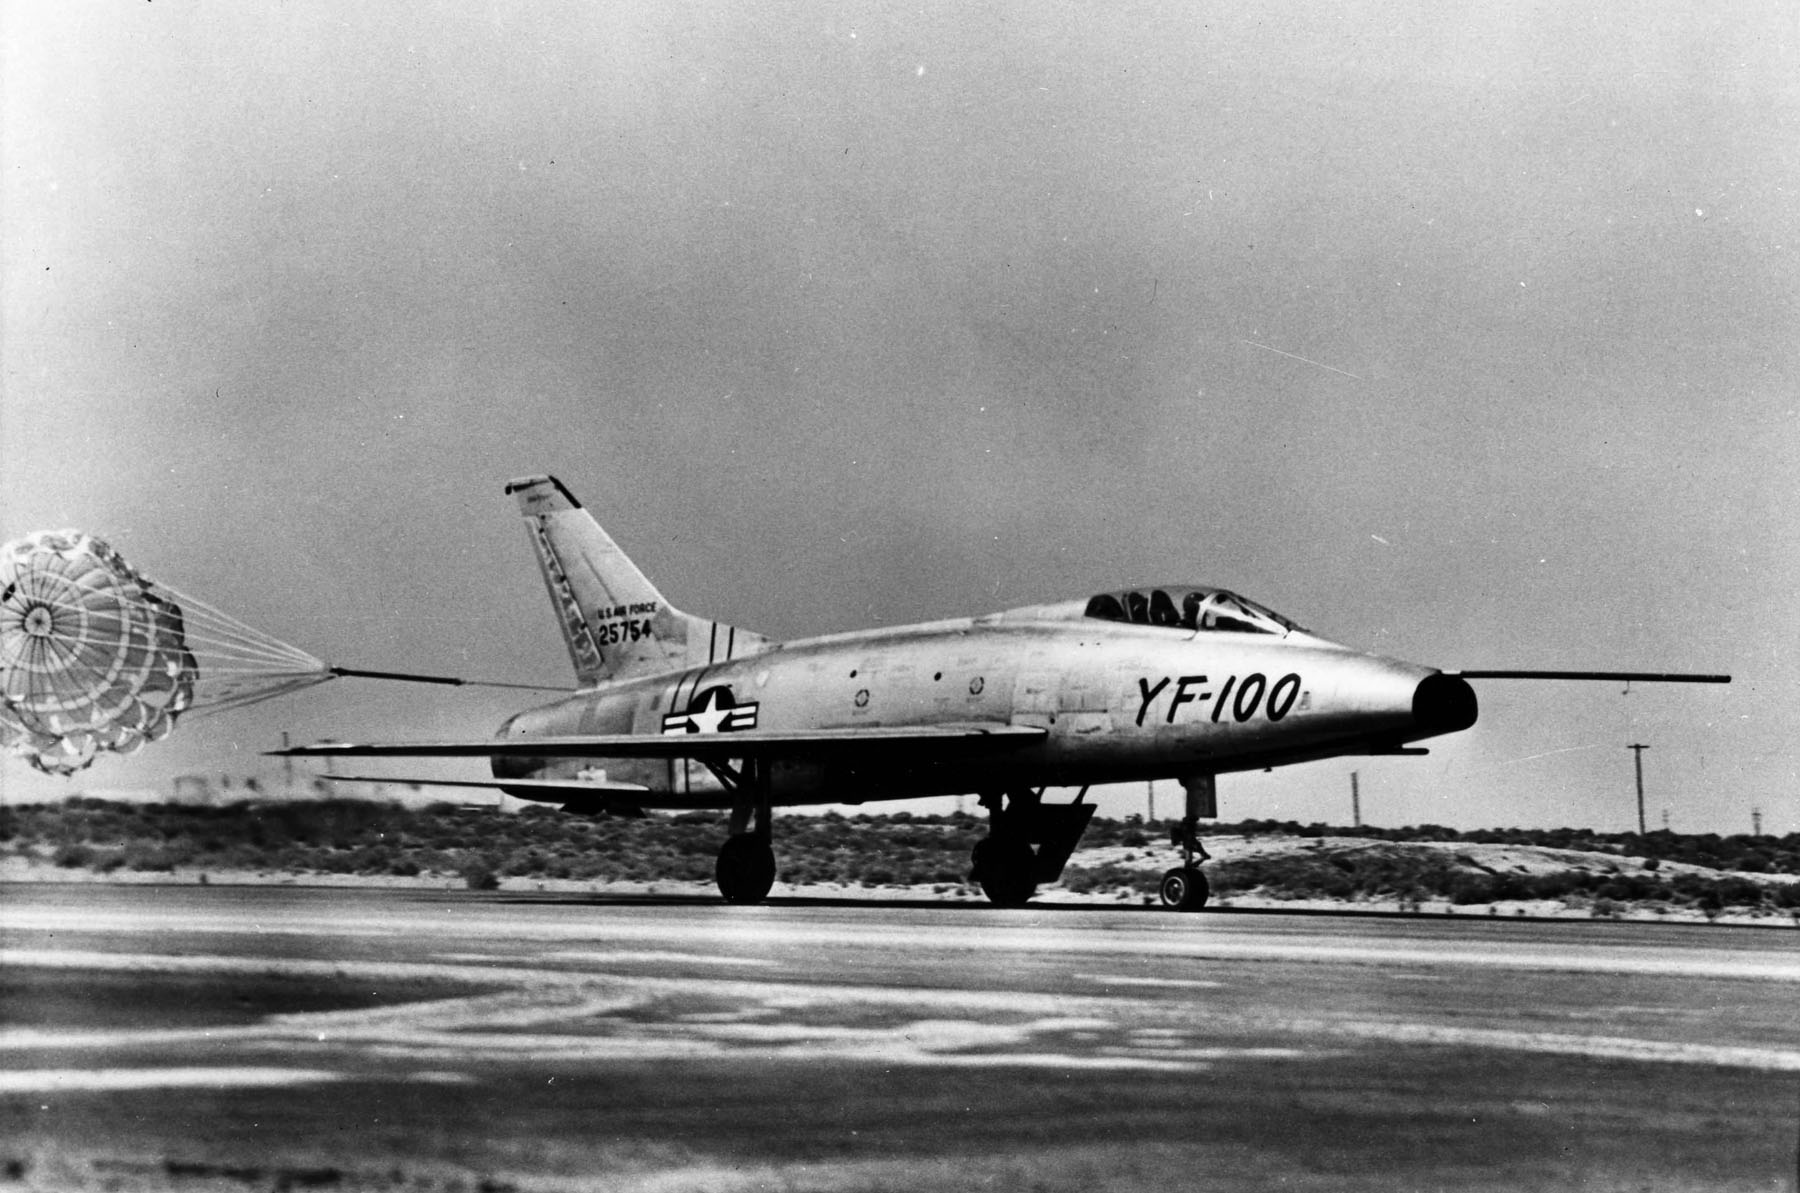 North American Aviation pre-production prototype YF-100A Super Sabre 52-5754 with drag chute deployed on landing at Edwards Air Force Base, California. (U.S. Air Force)